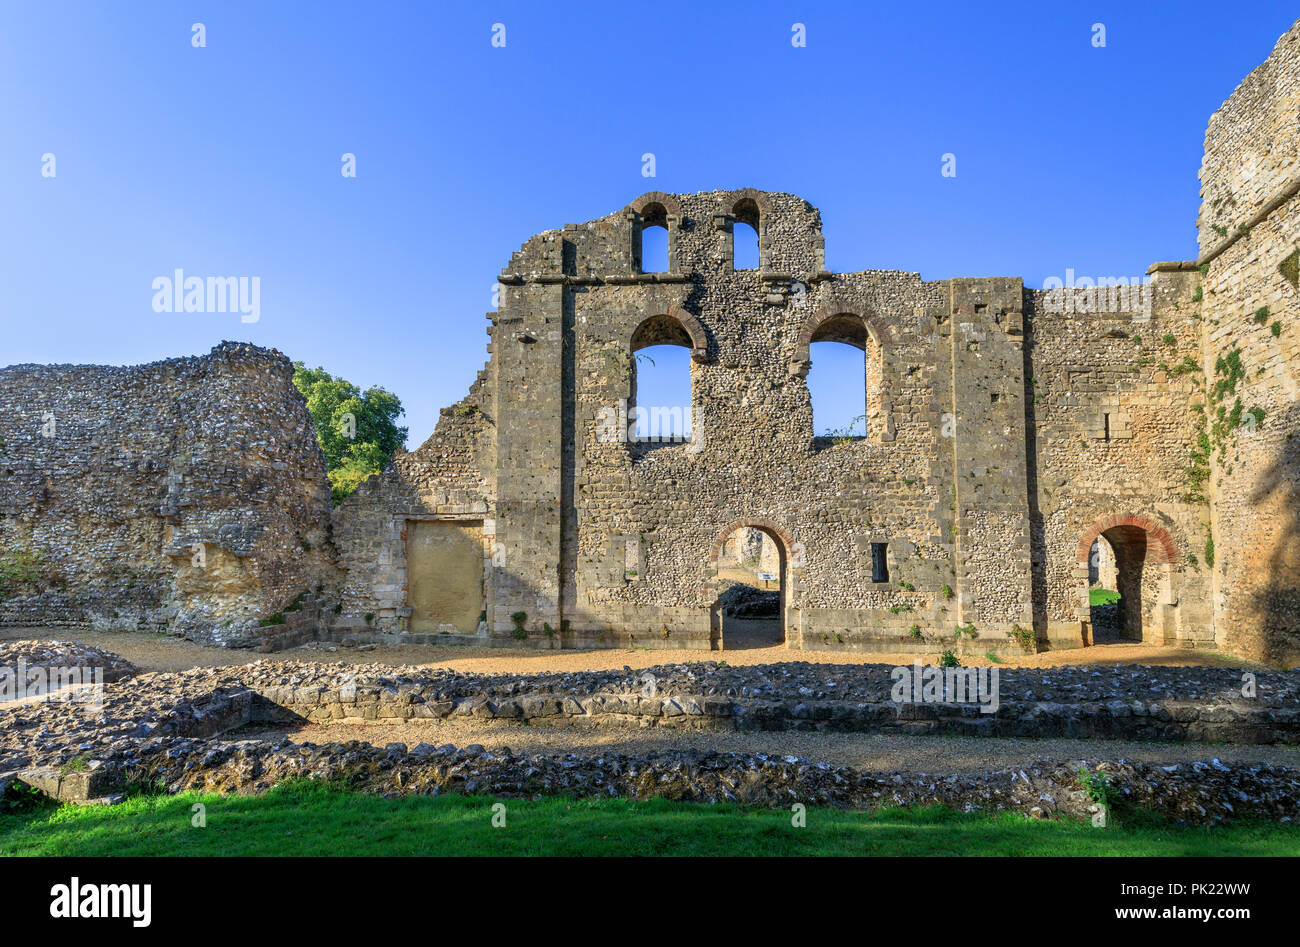 Ruins of ancient medieval Wolvesey Castle (Old Bishop's Palace) in Winchester, Hampshire, southern England, UK on a bright sunny day with blue sky Stock Photo